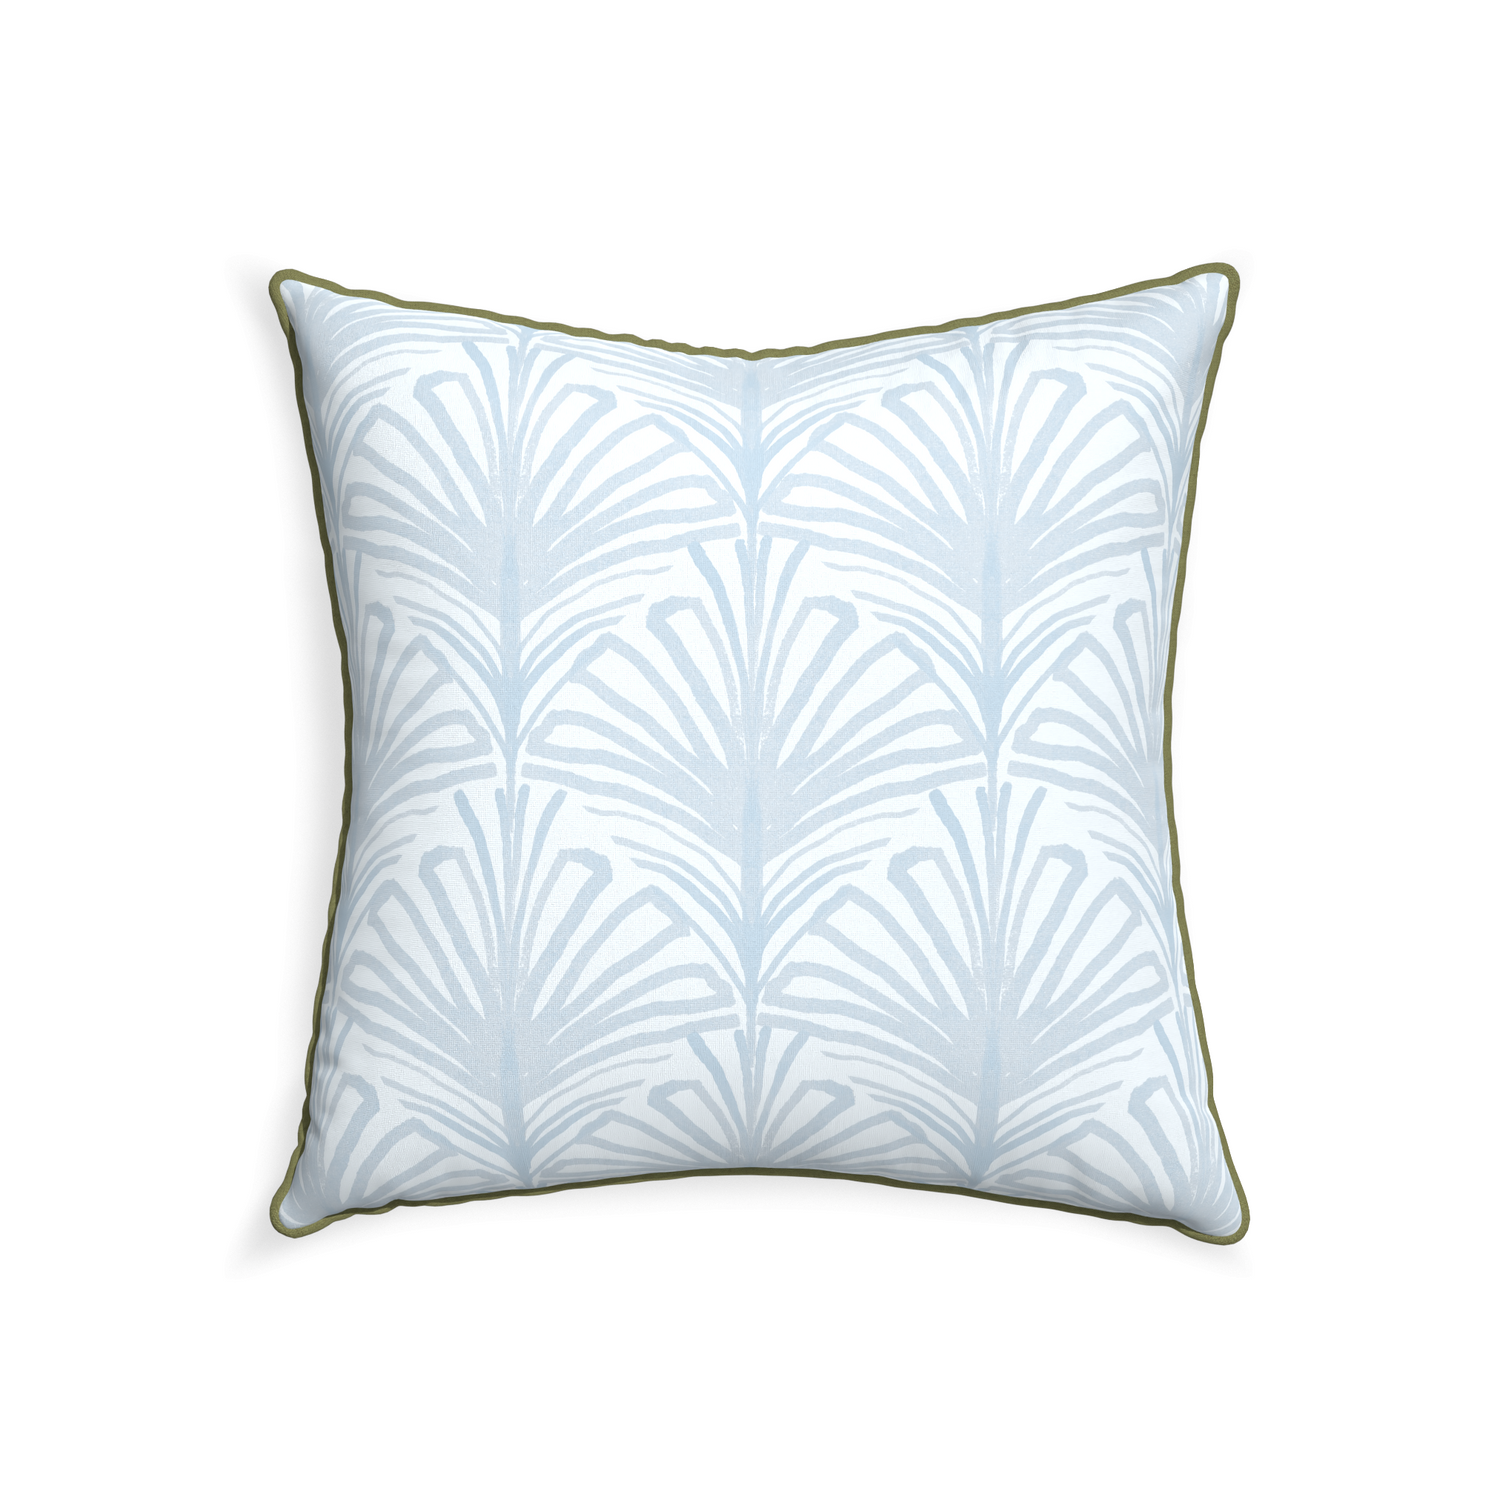 22-square suzy sky custom pillow with moss piping on white background